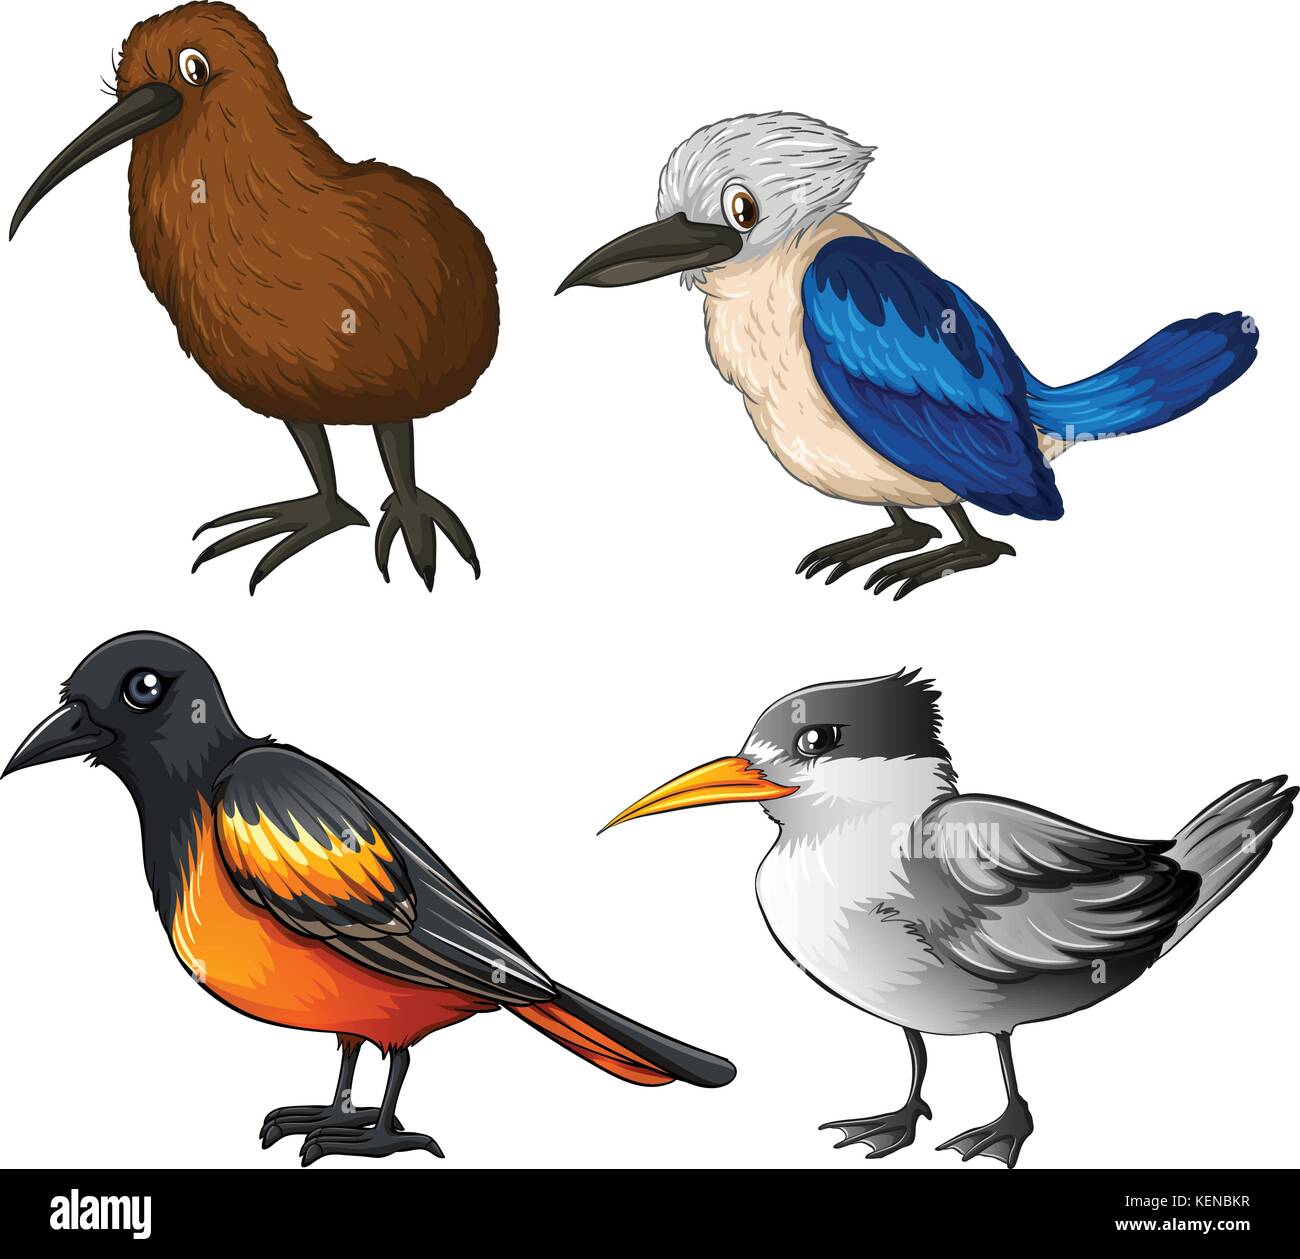 Illustration of four different kind of birds Stock Vector Image ...